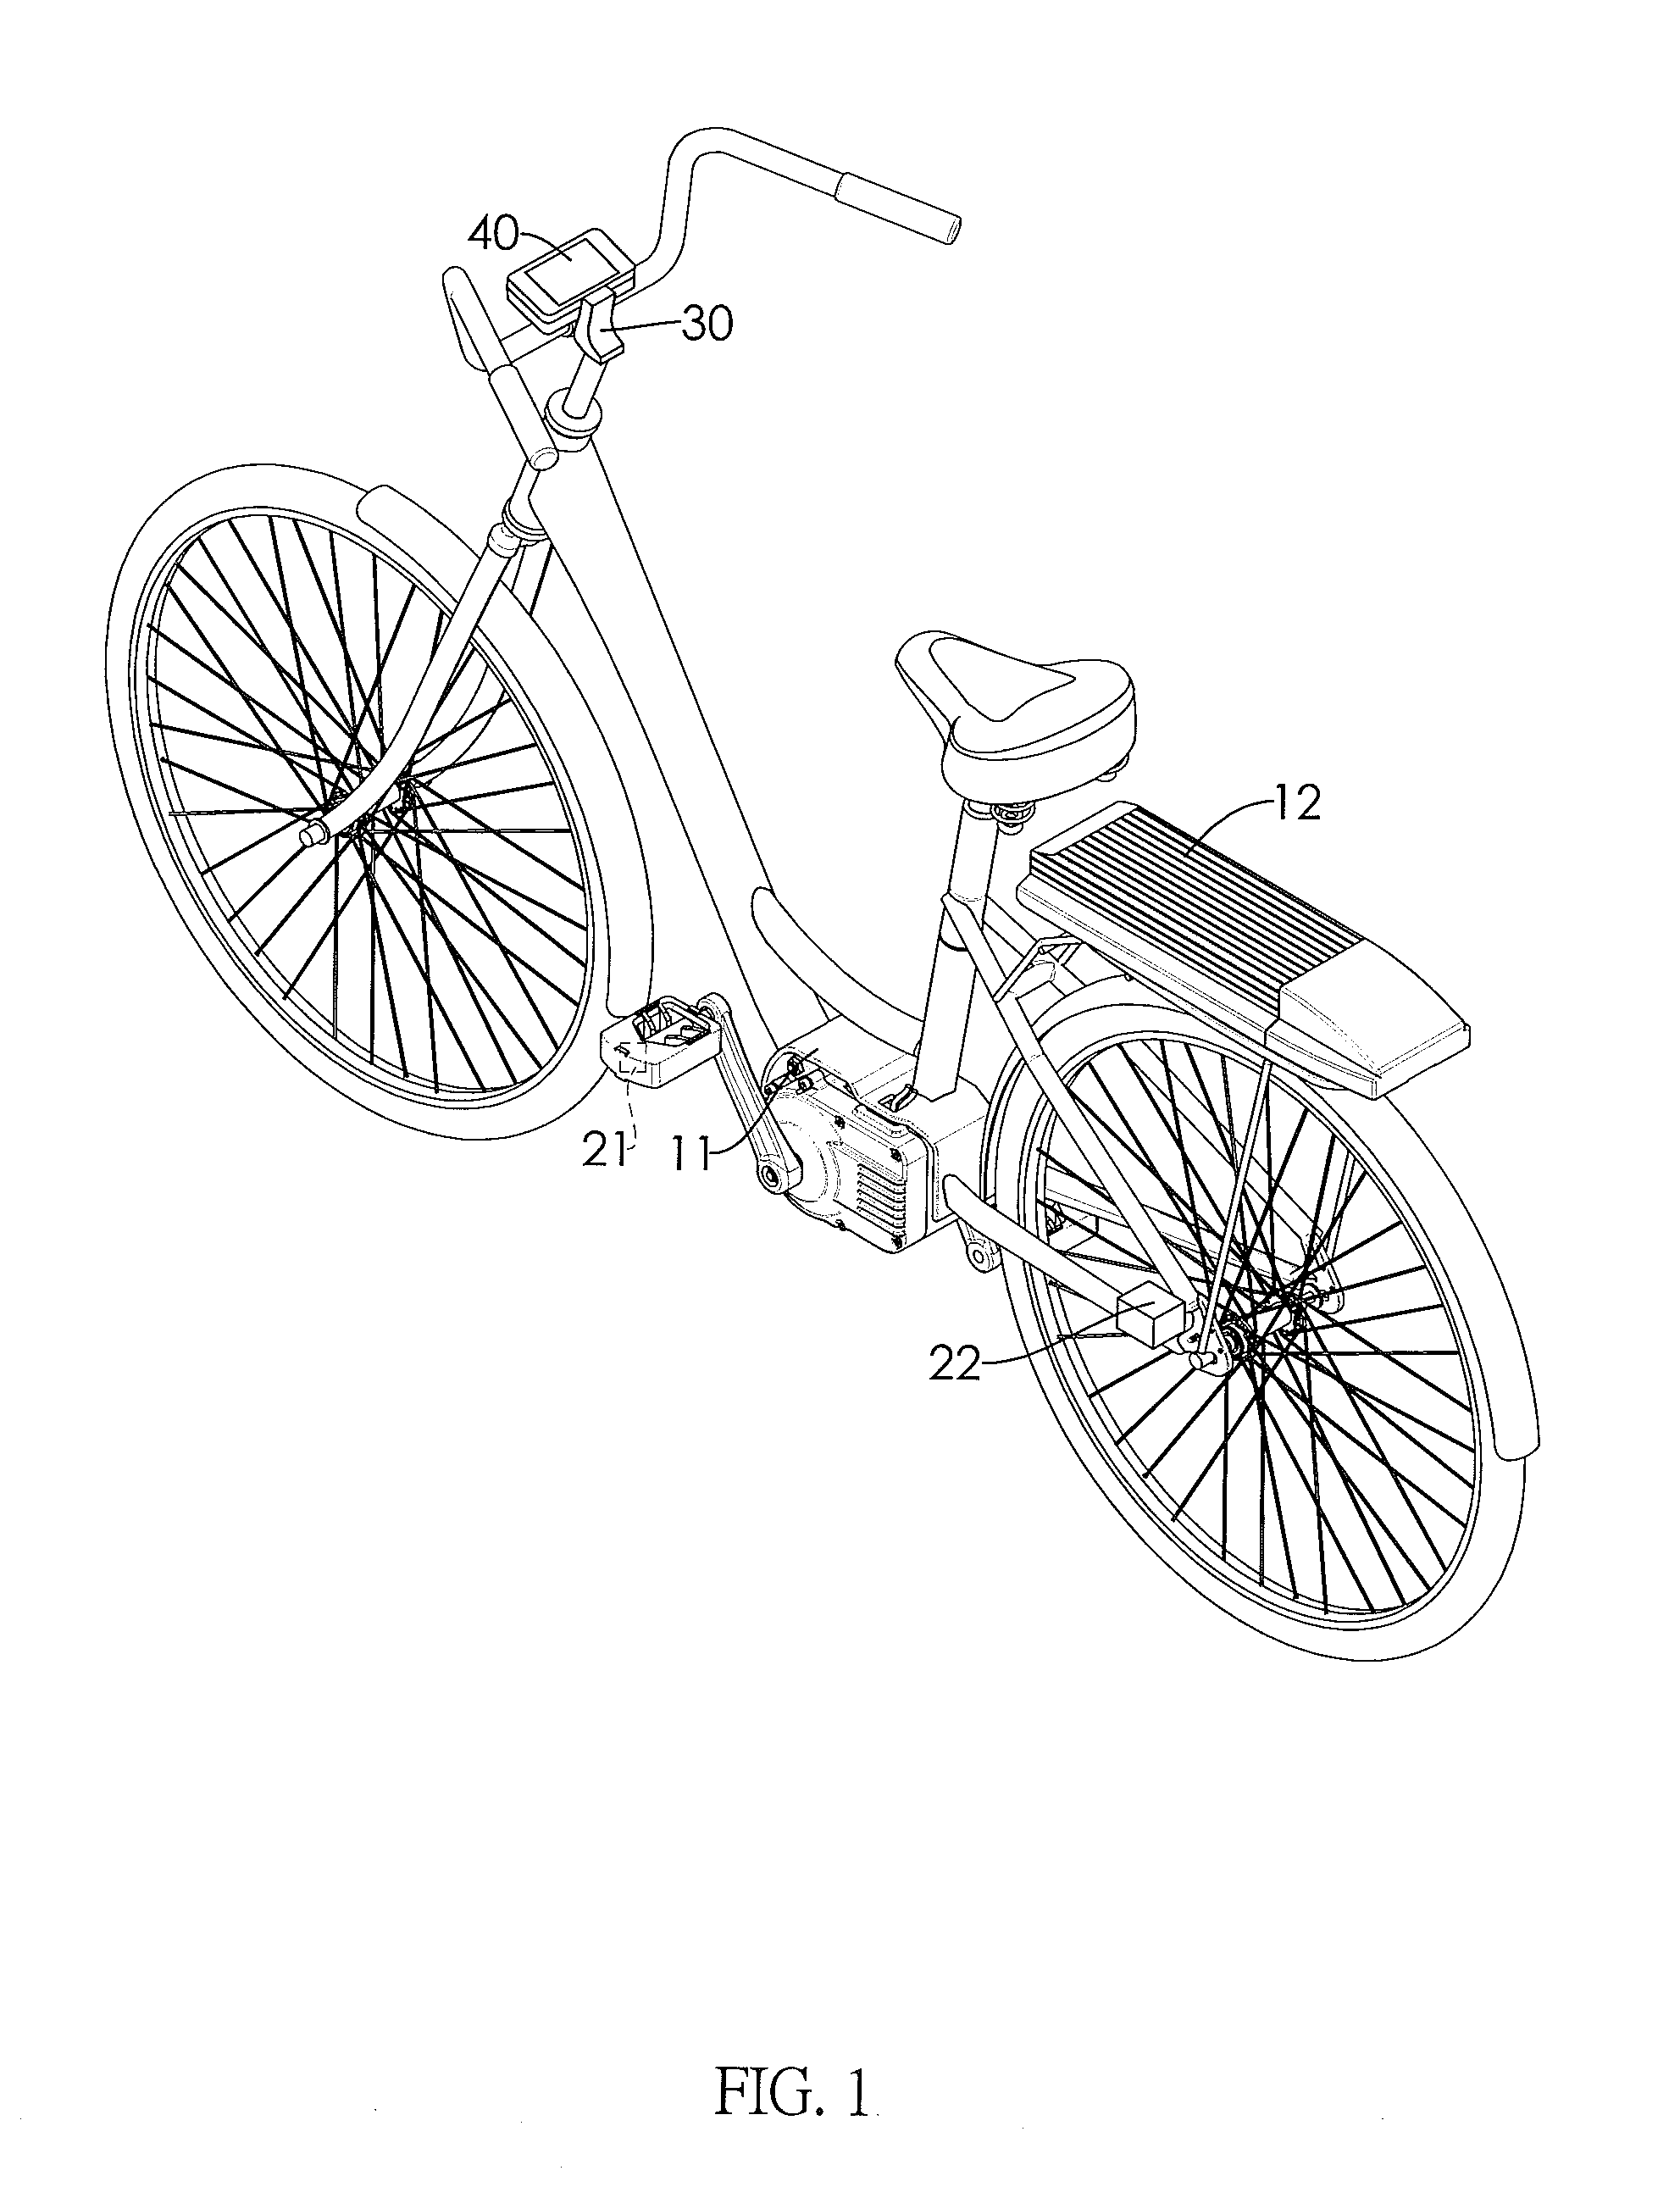 Electromechanical Control System of Electric Bicycle Integrating Smart Mobile Device and Cloud Services